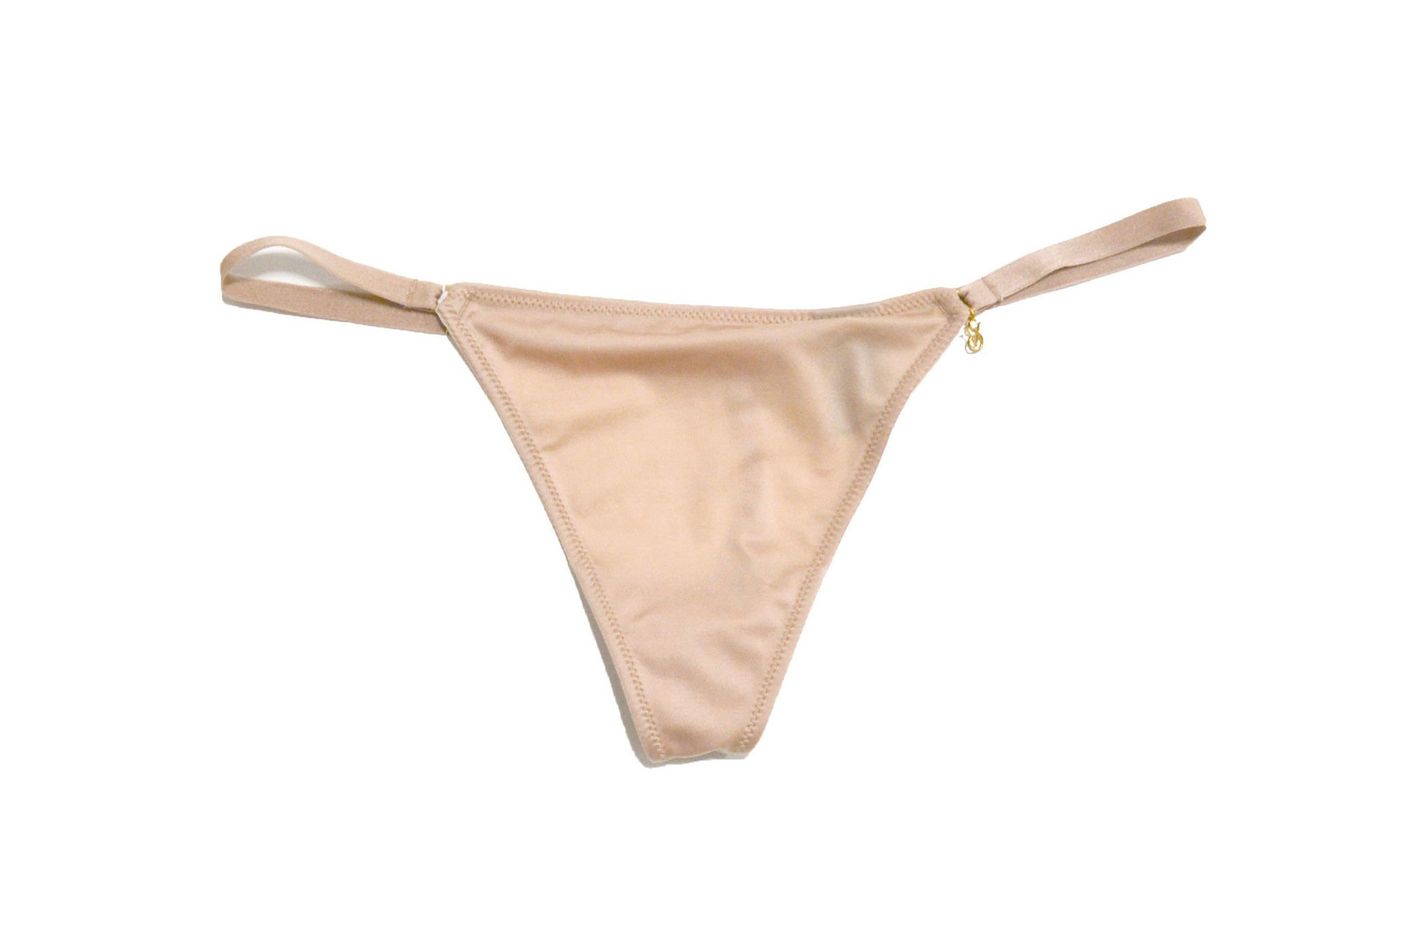 9 Women Share Their Pick for Best Thong